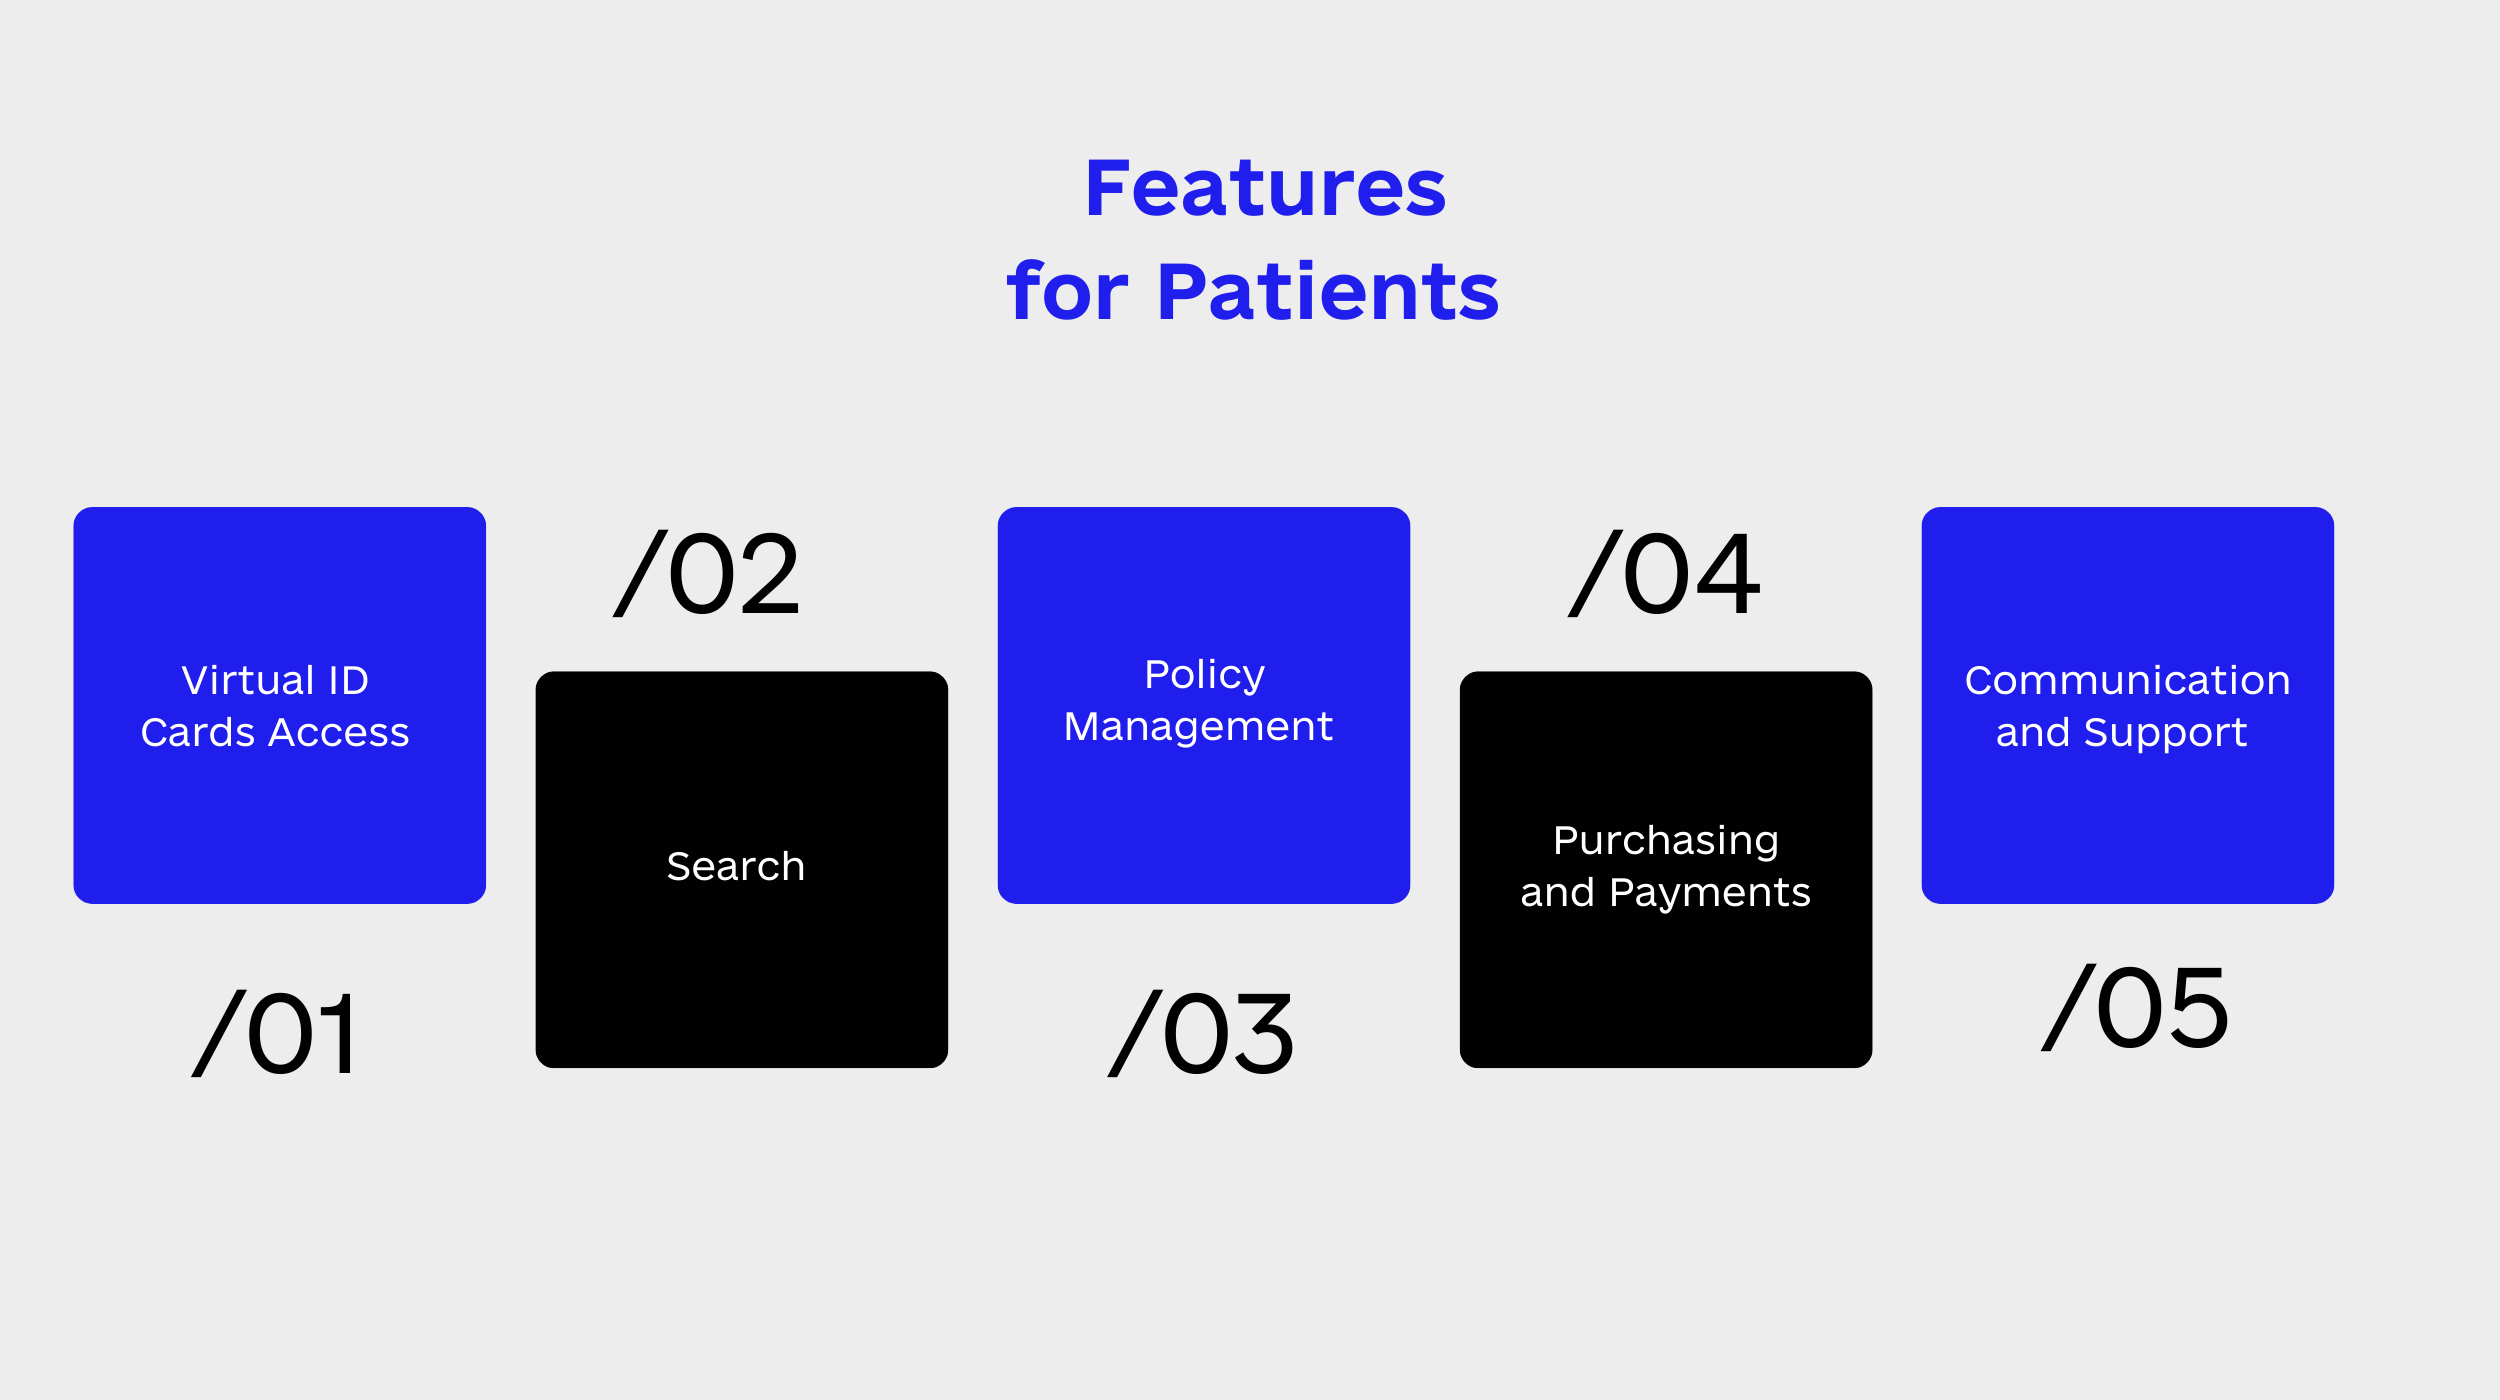 Features for Patients